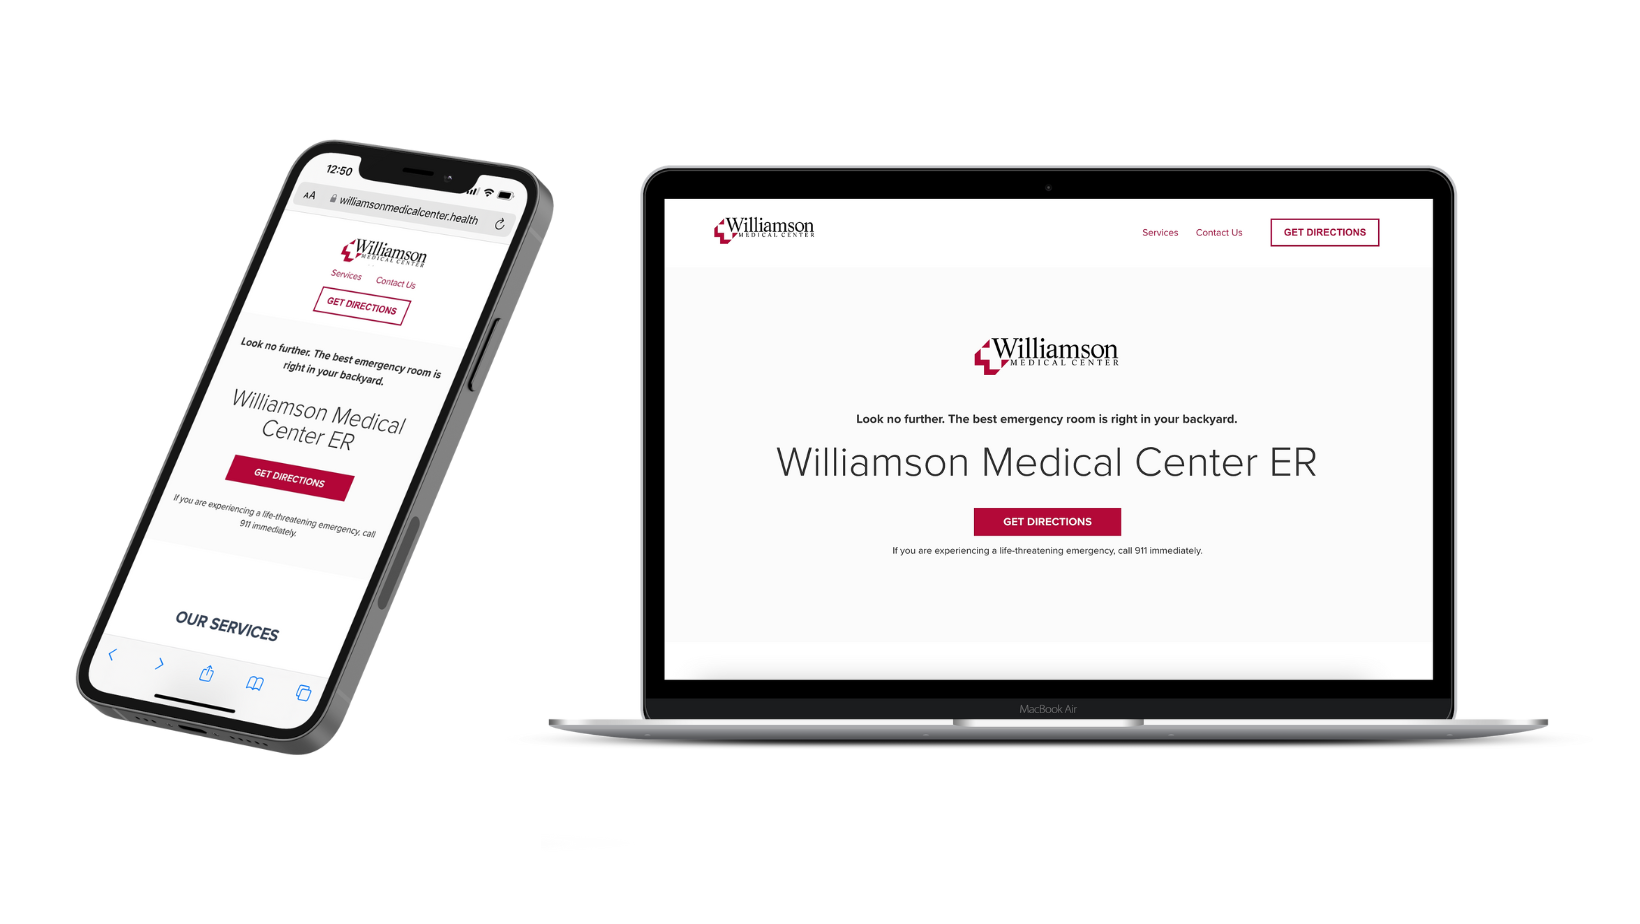 Williamson Medical Center emergency room campaign